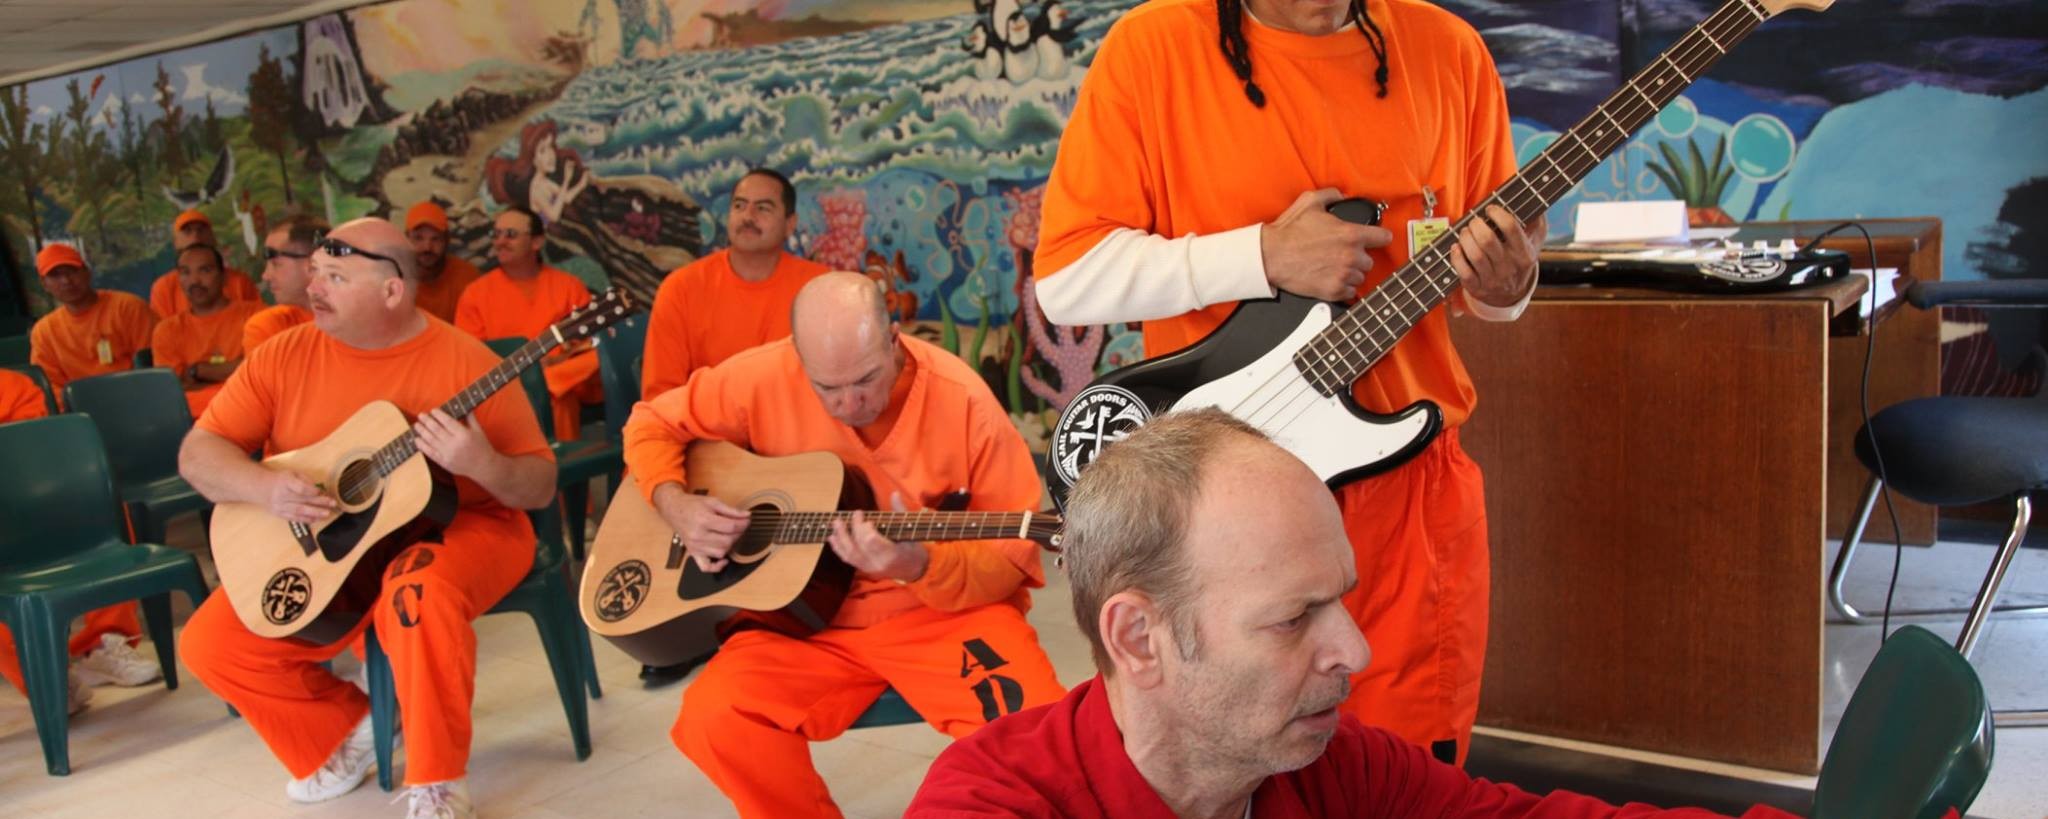 How Music Is Keeping People From Going Back To Prison